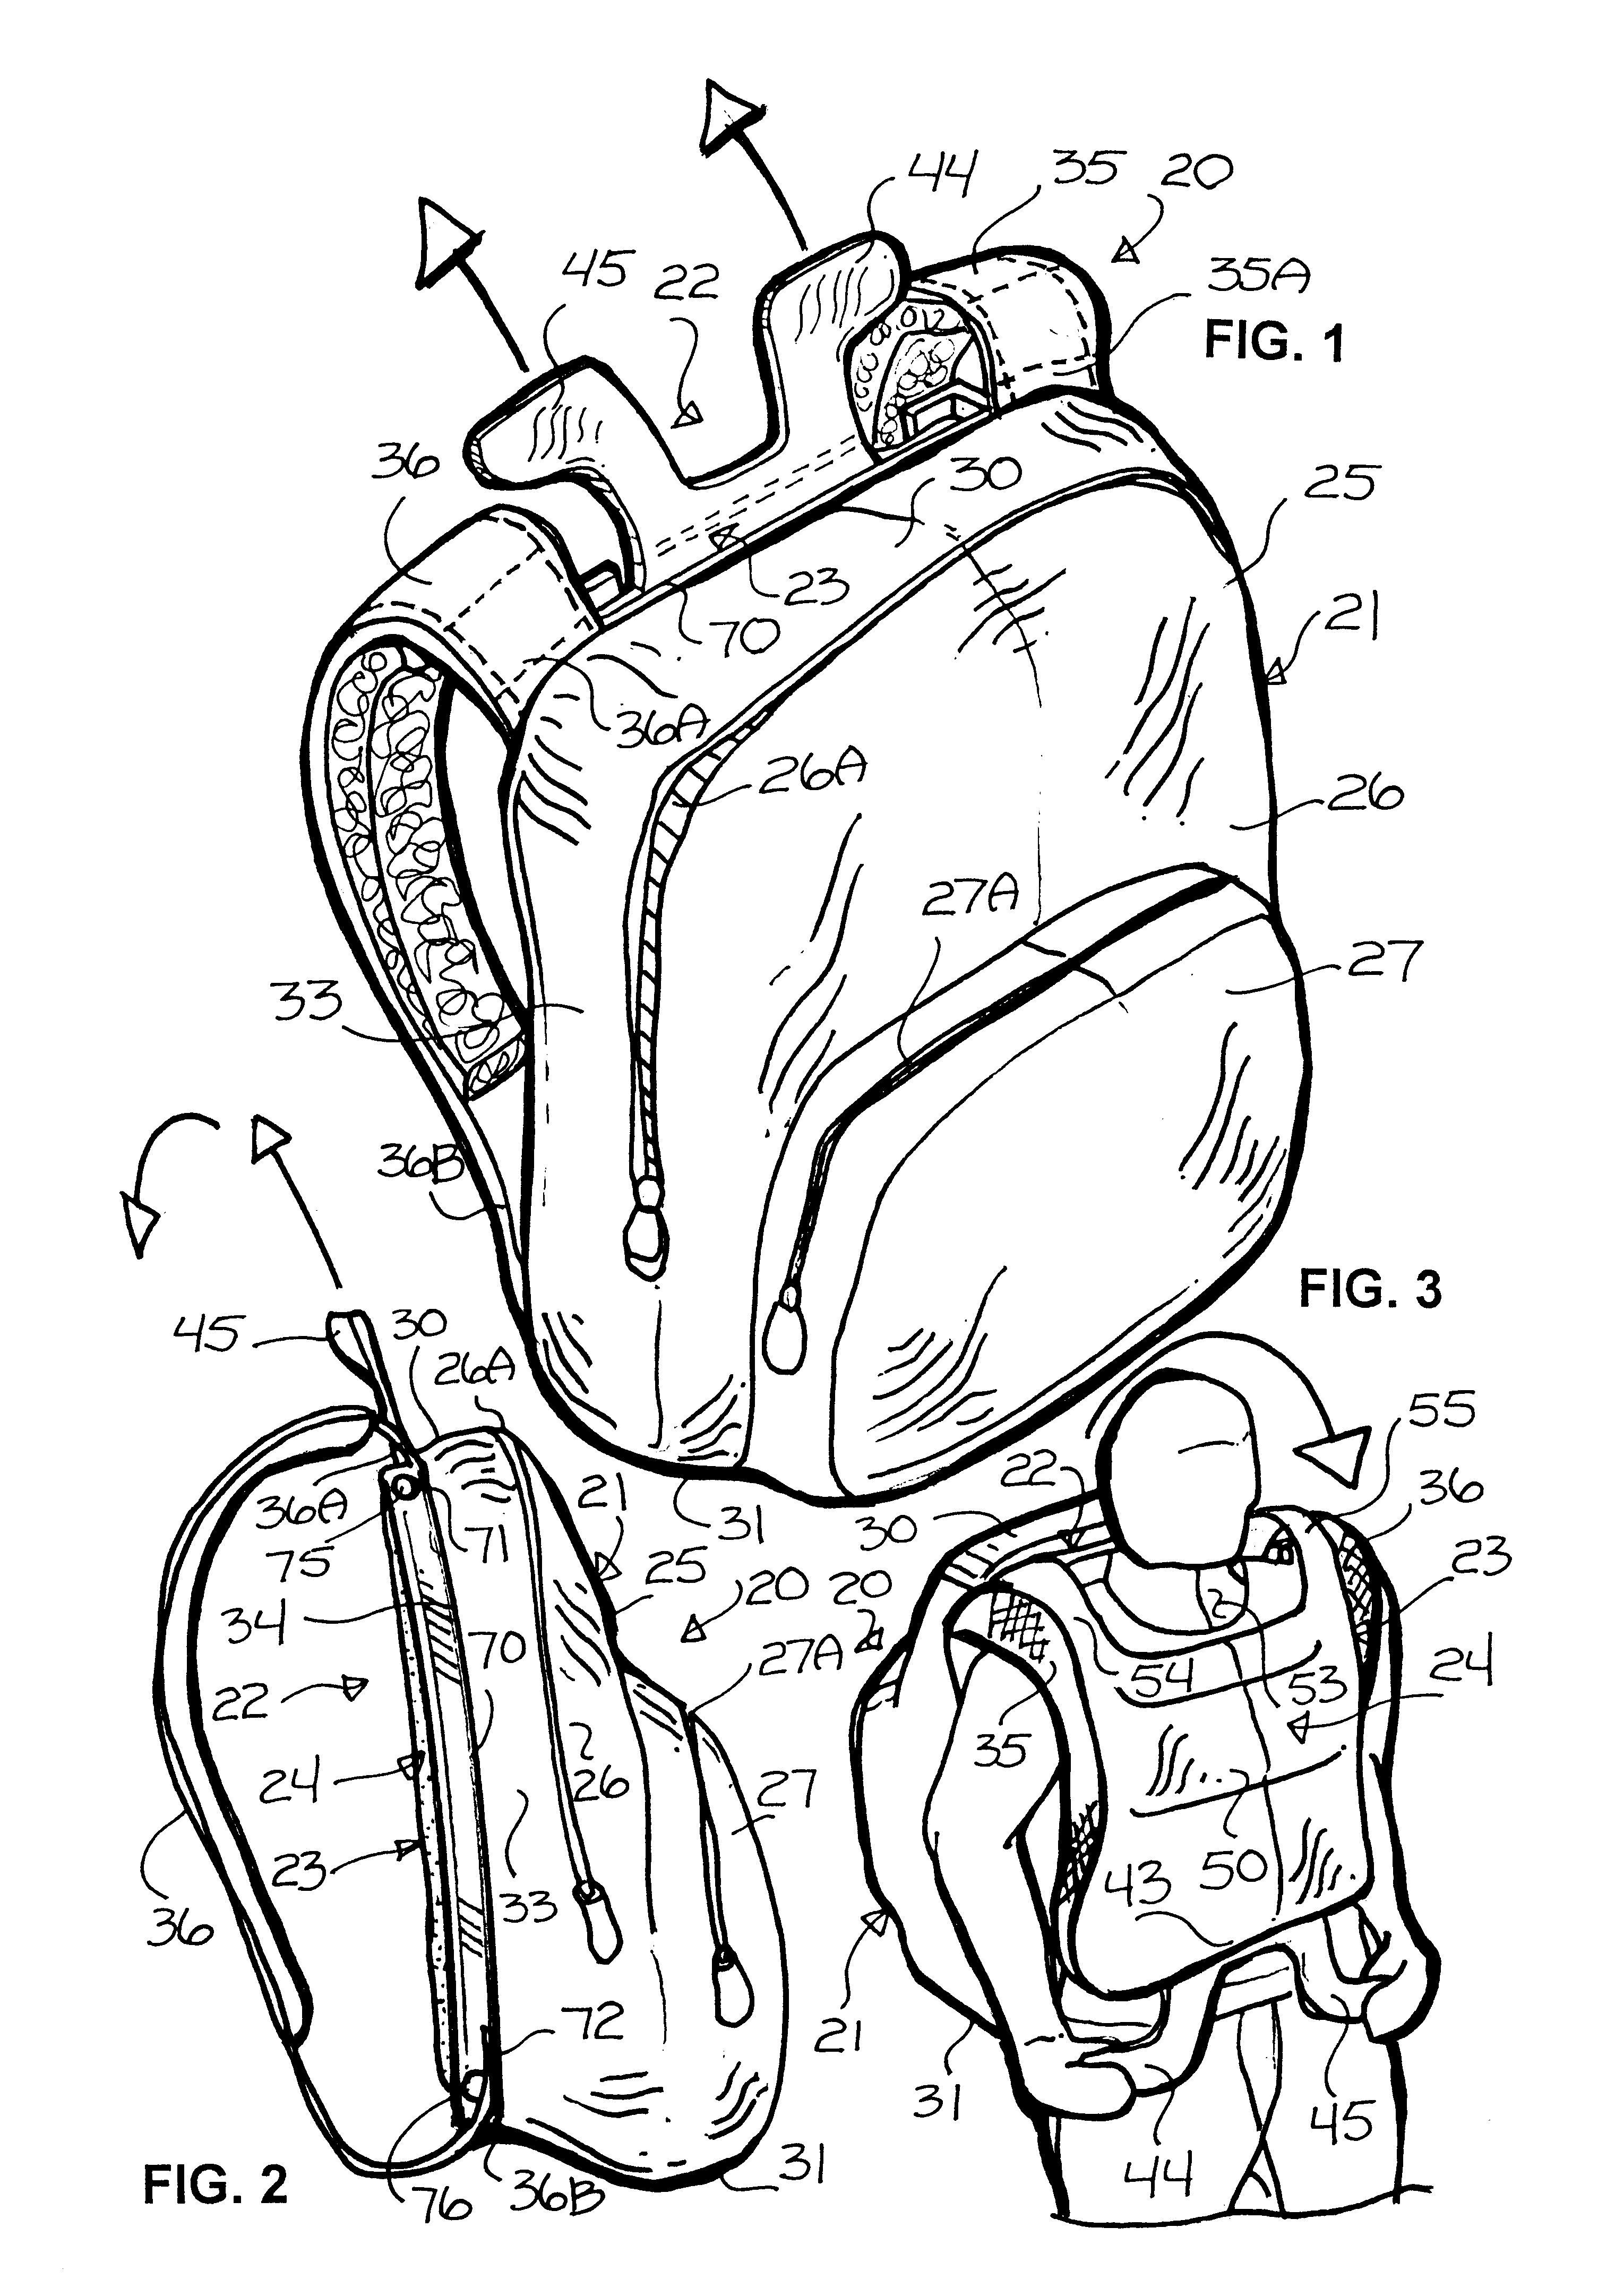 Backpack with deployable armor